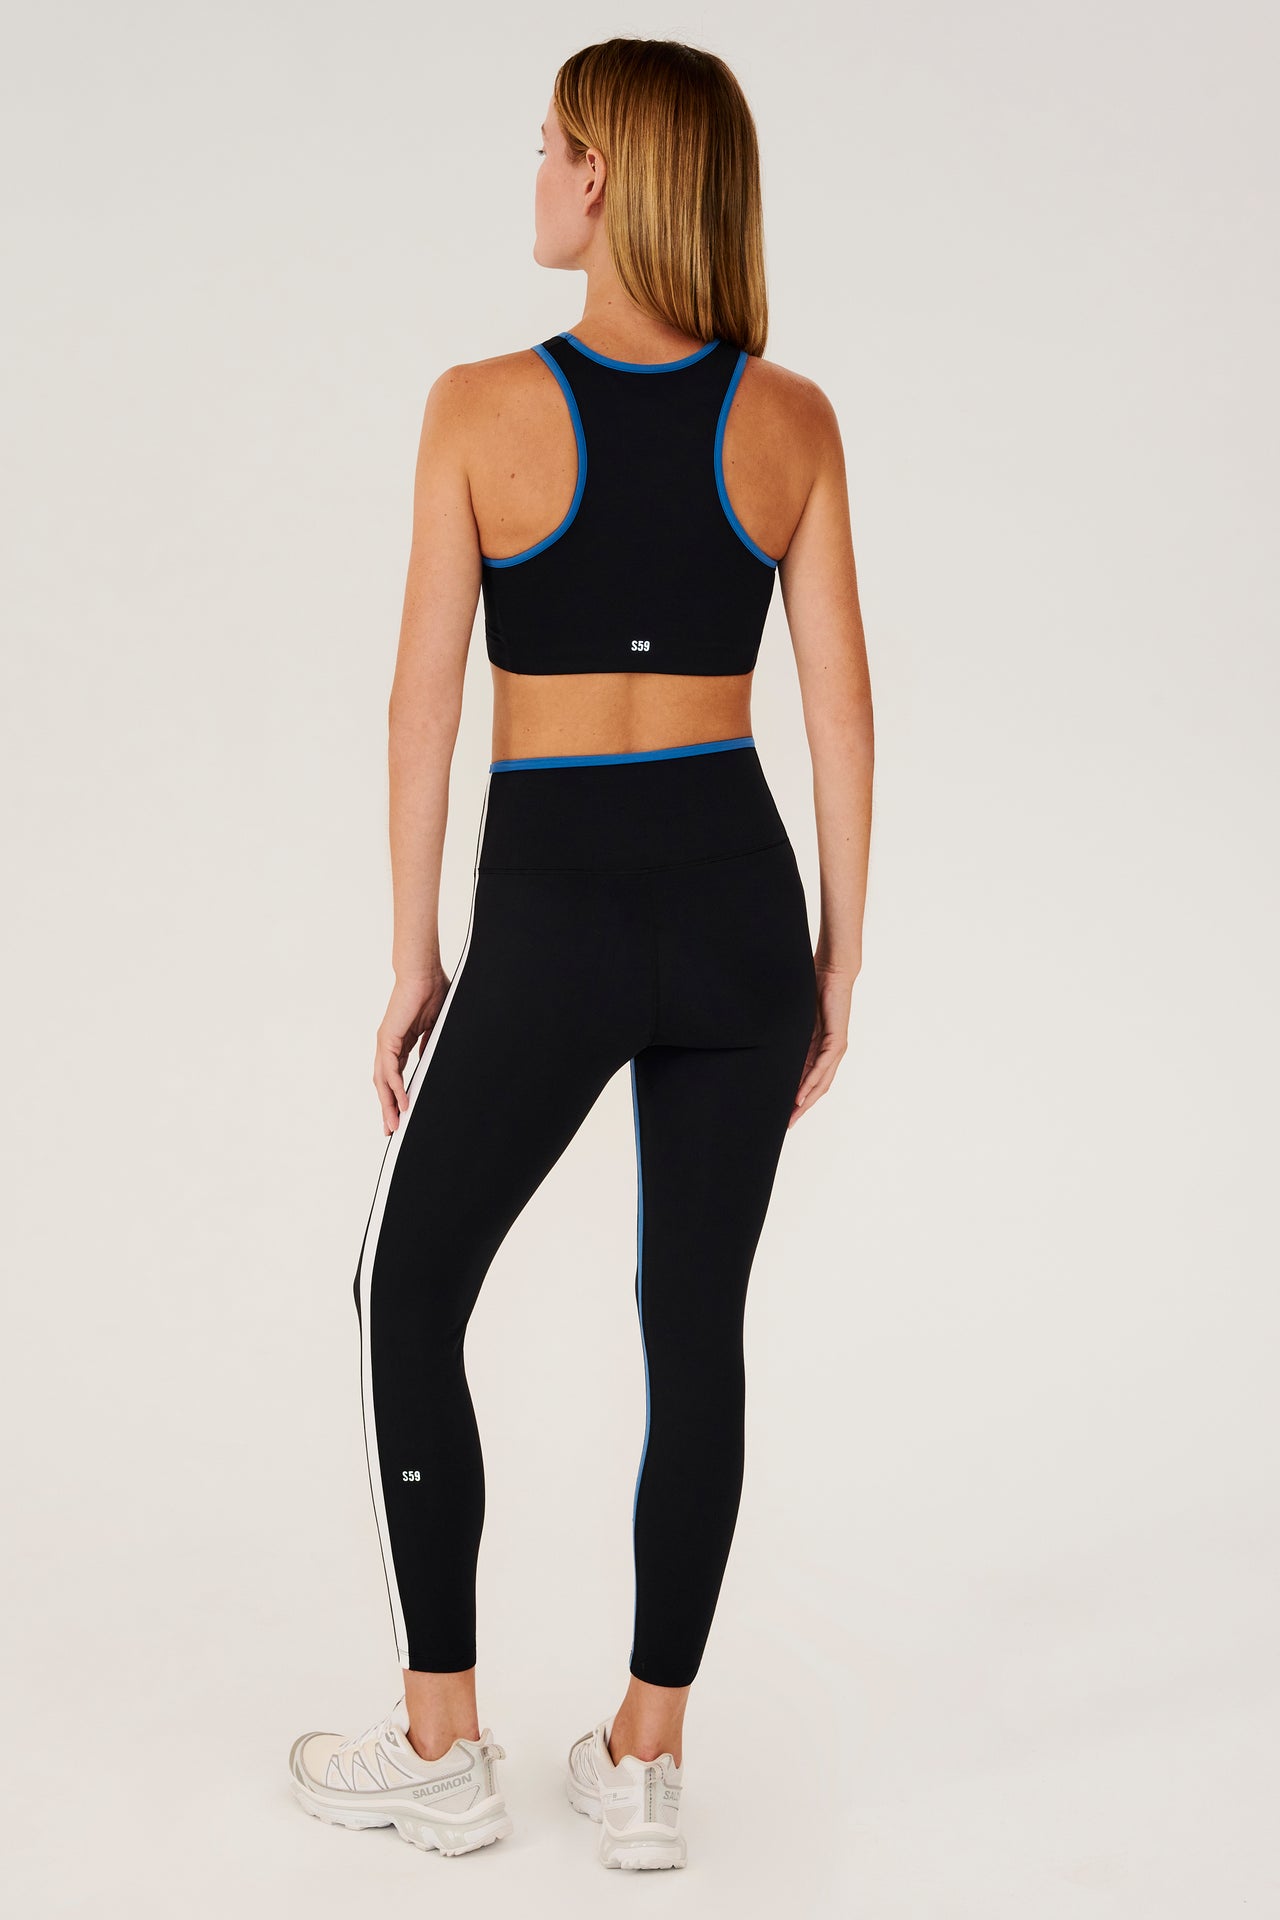 Full back view of girl wearing black sports bra with blue hem and black leggings with blue stripe around the waistband and white stripe down the outer seam and a blue strip on inseam and white shoes